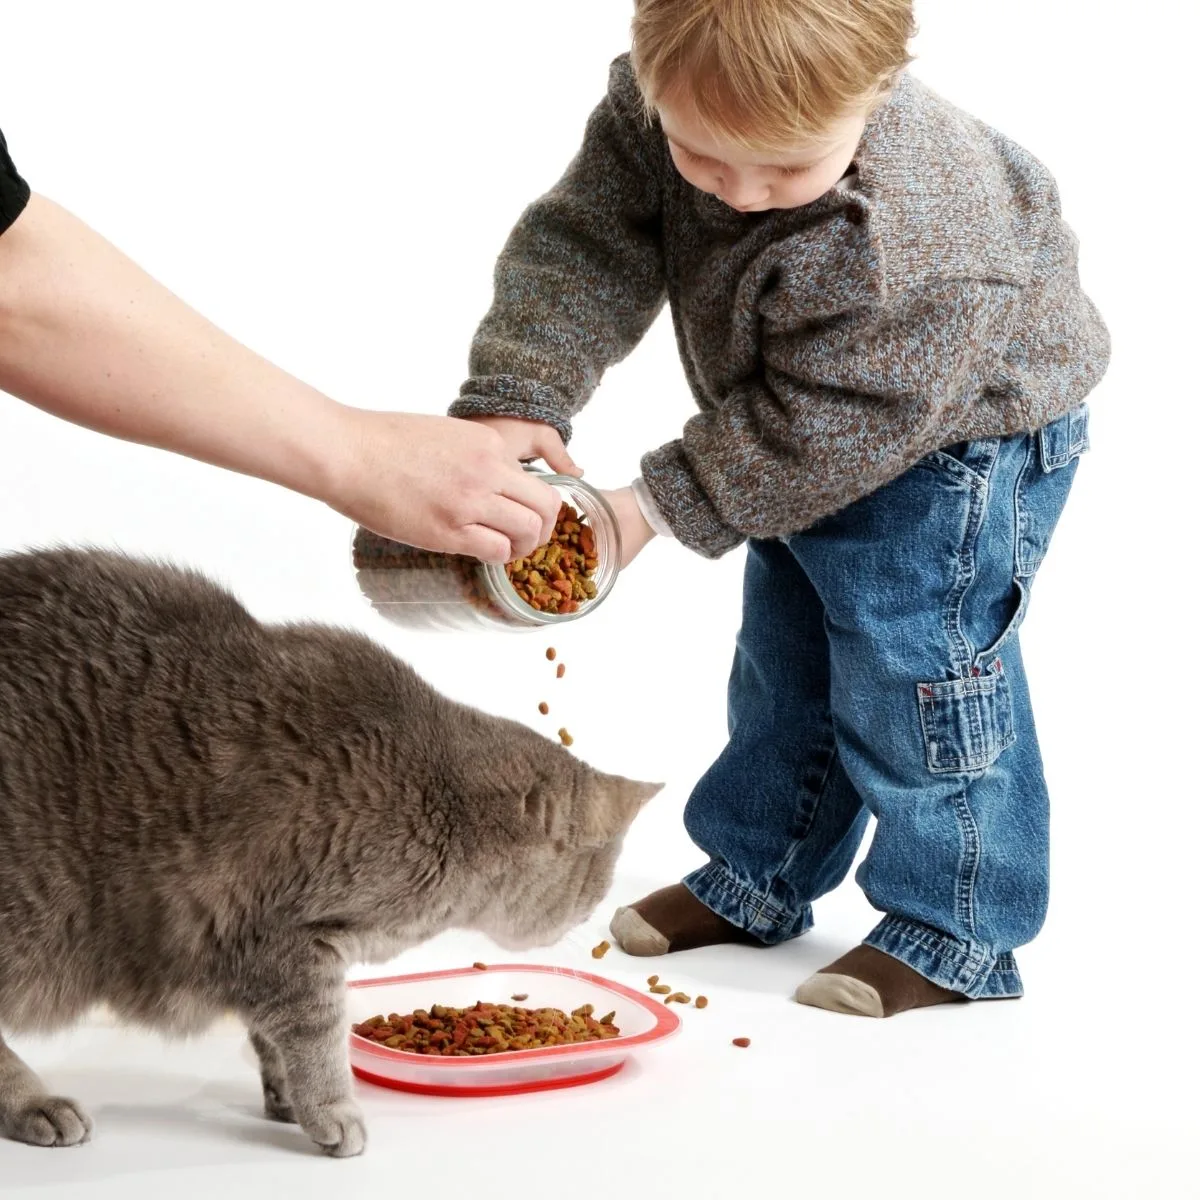 toddler helping feed cat